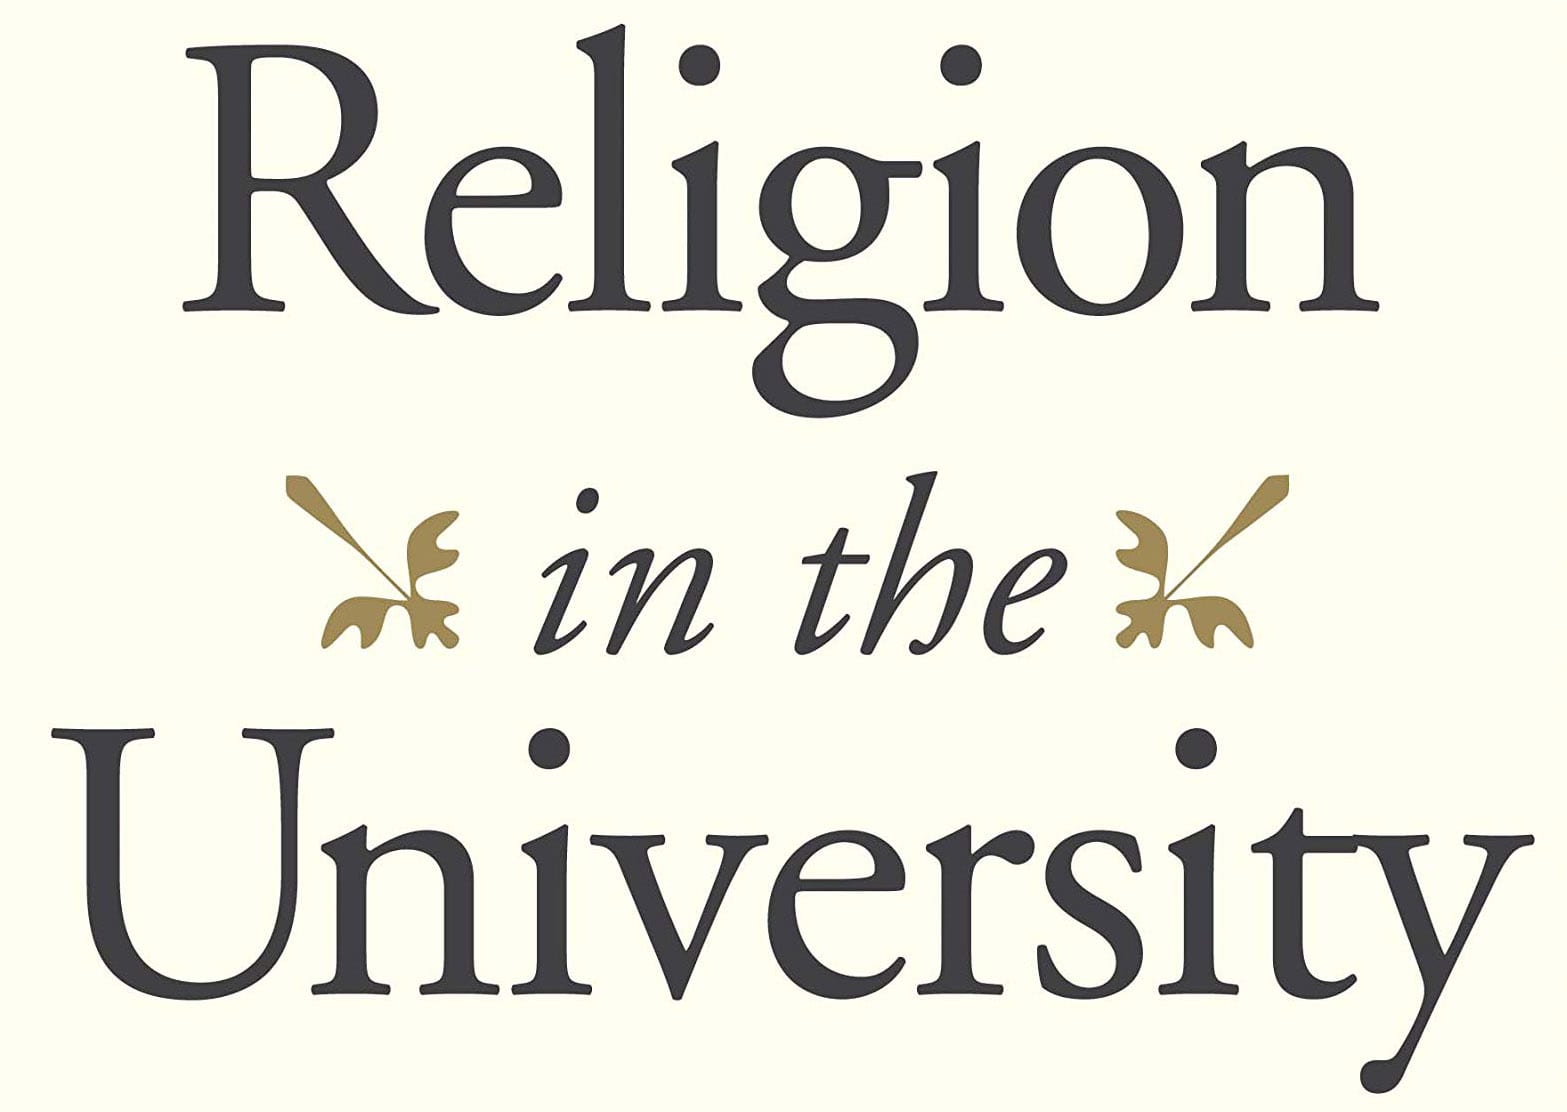 Book cover of "Religion in the University"